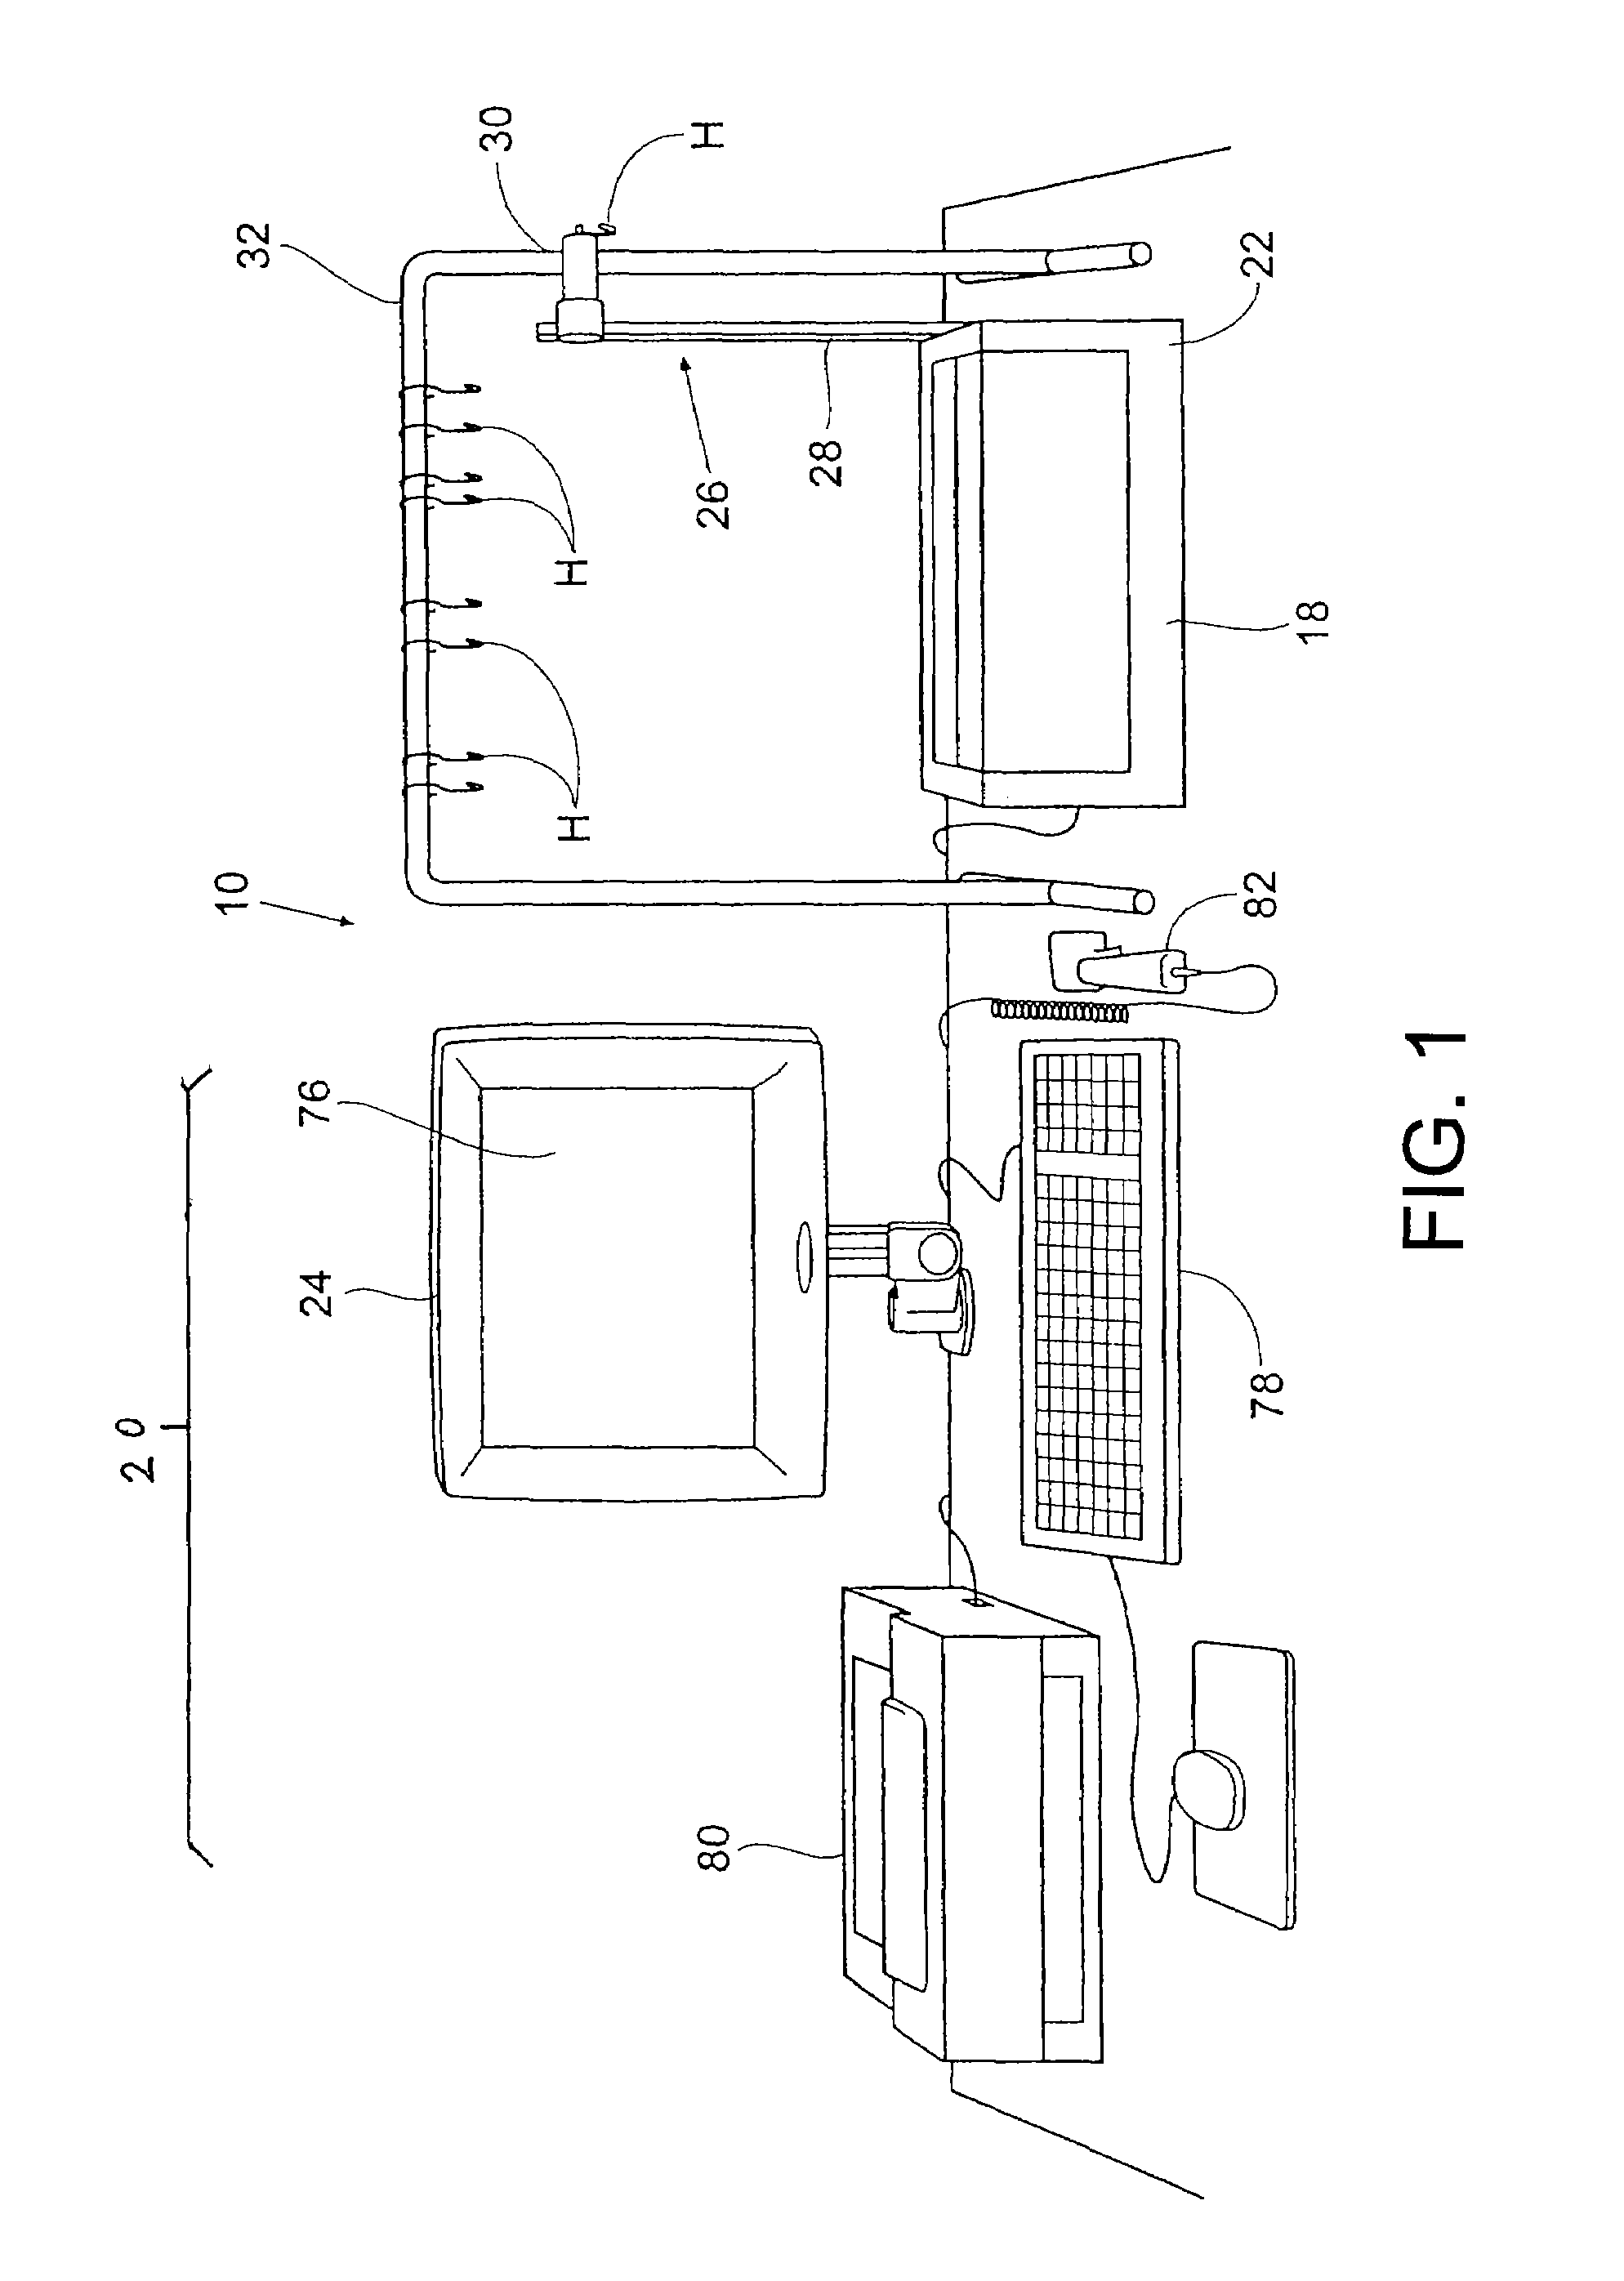 Apparatus and method for transferring data to a pharmaceutical compounding system